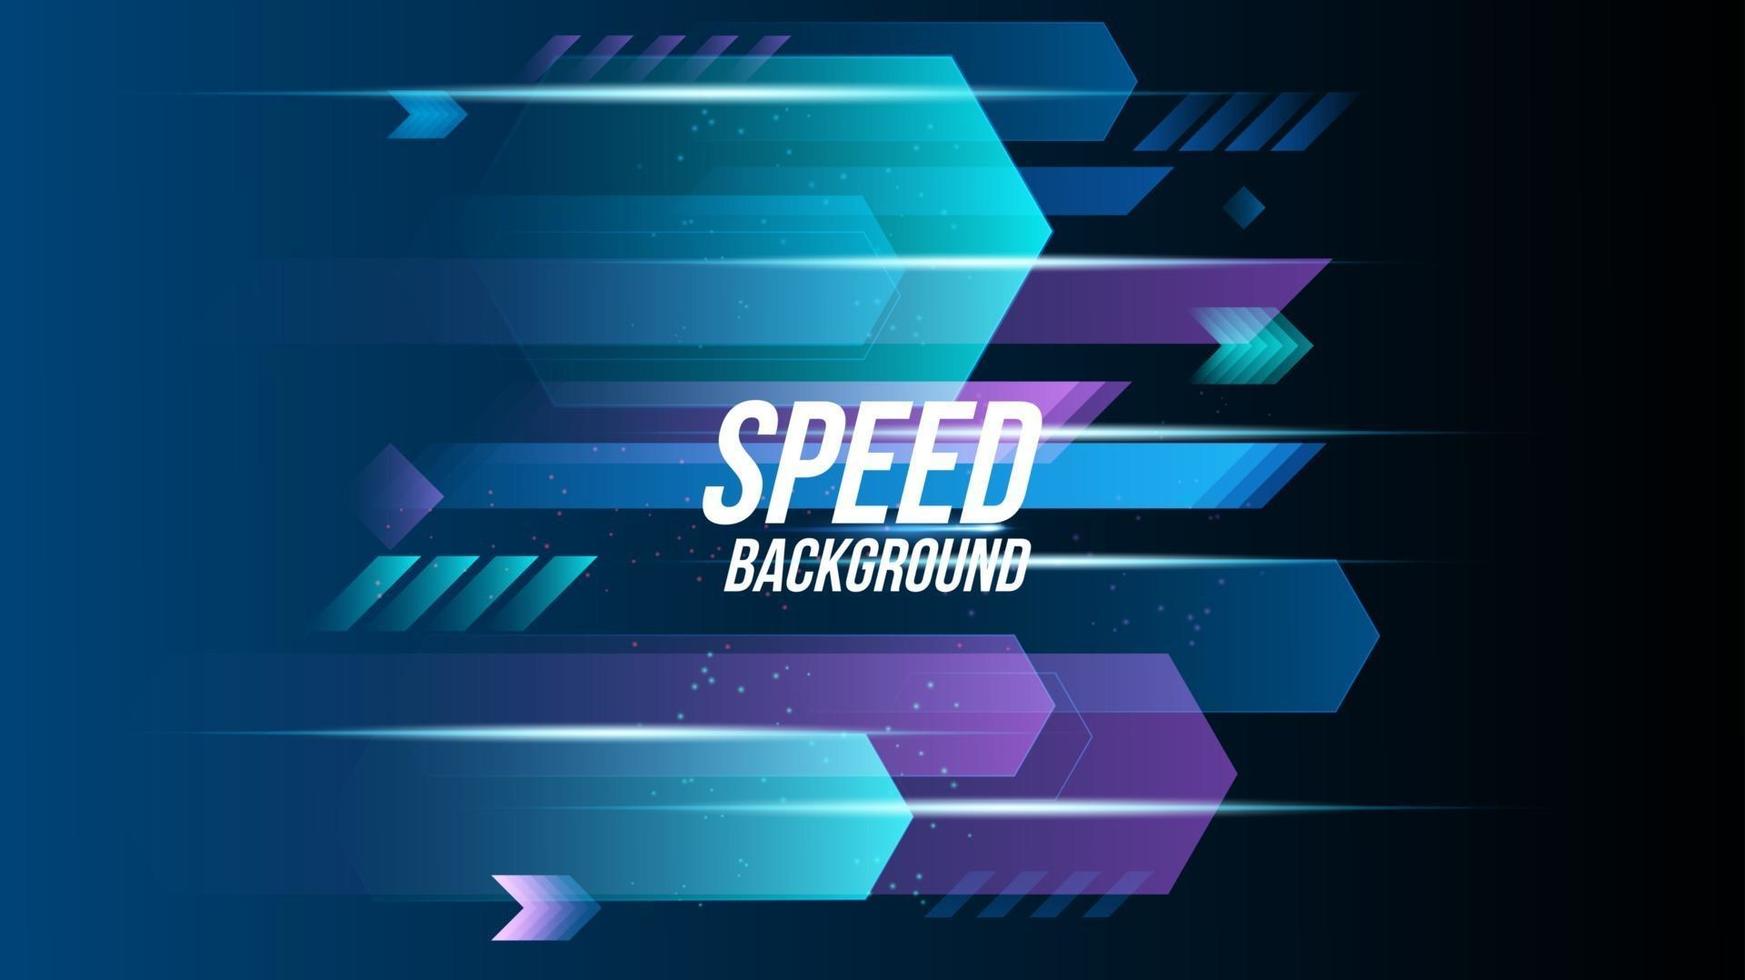 Abstract background technology high speed racing for sports of long exposure light on black background vector